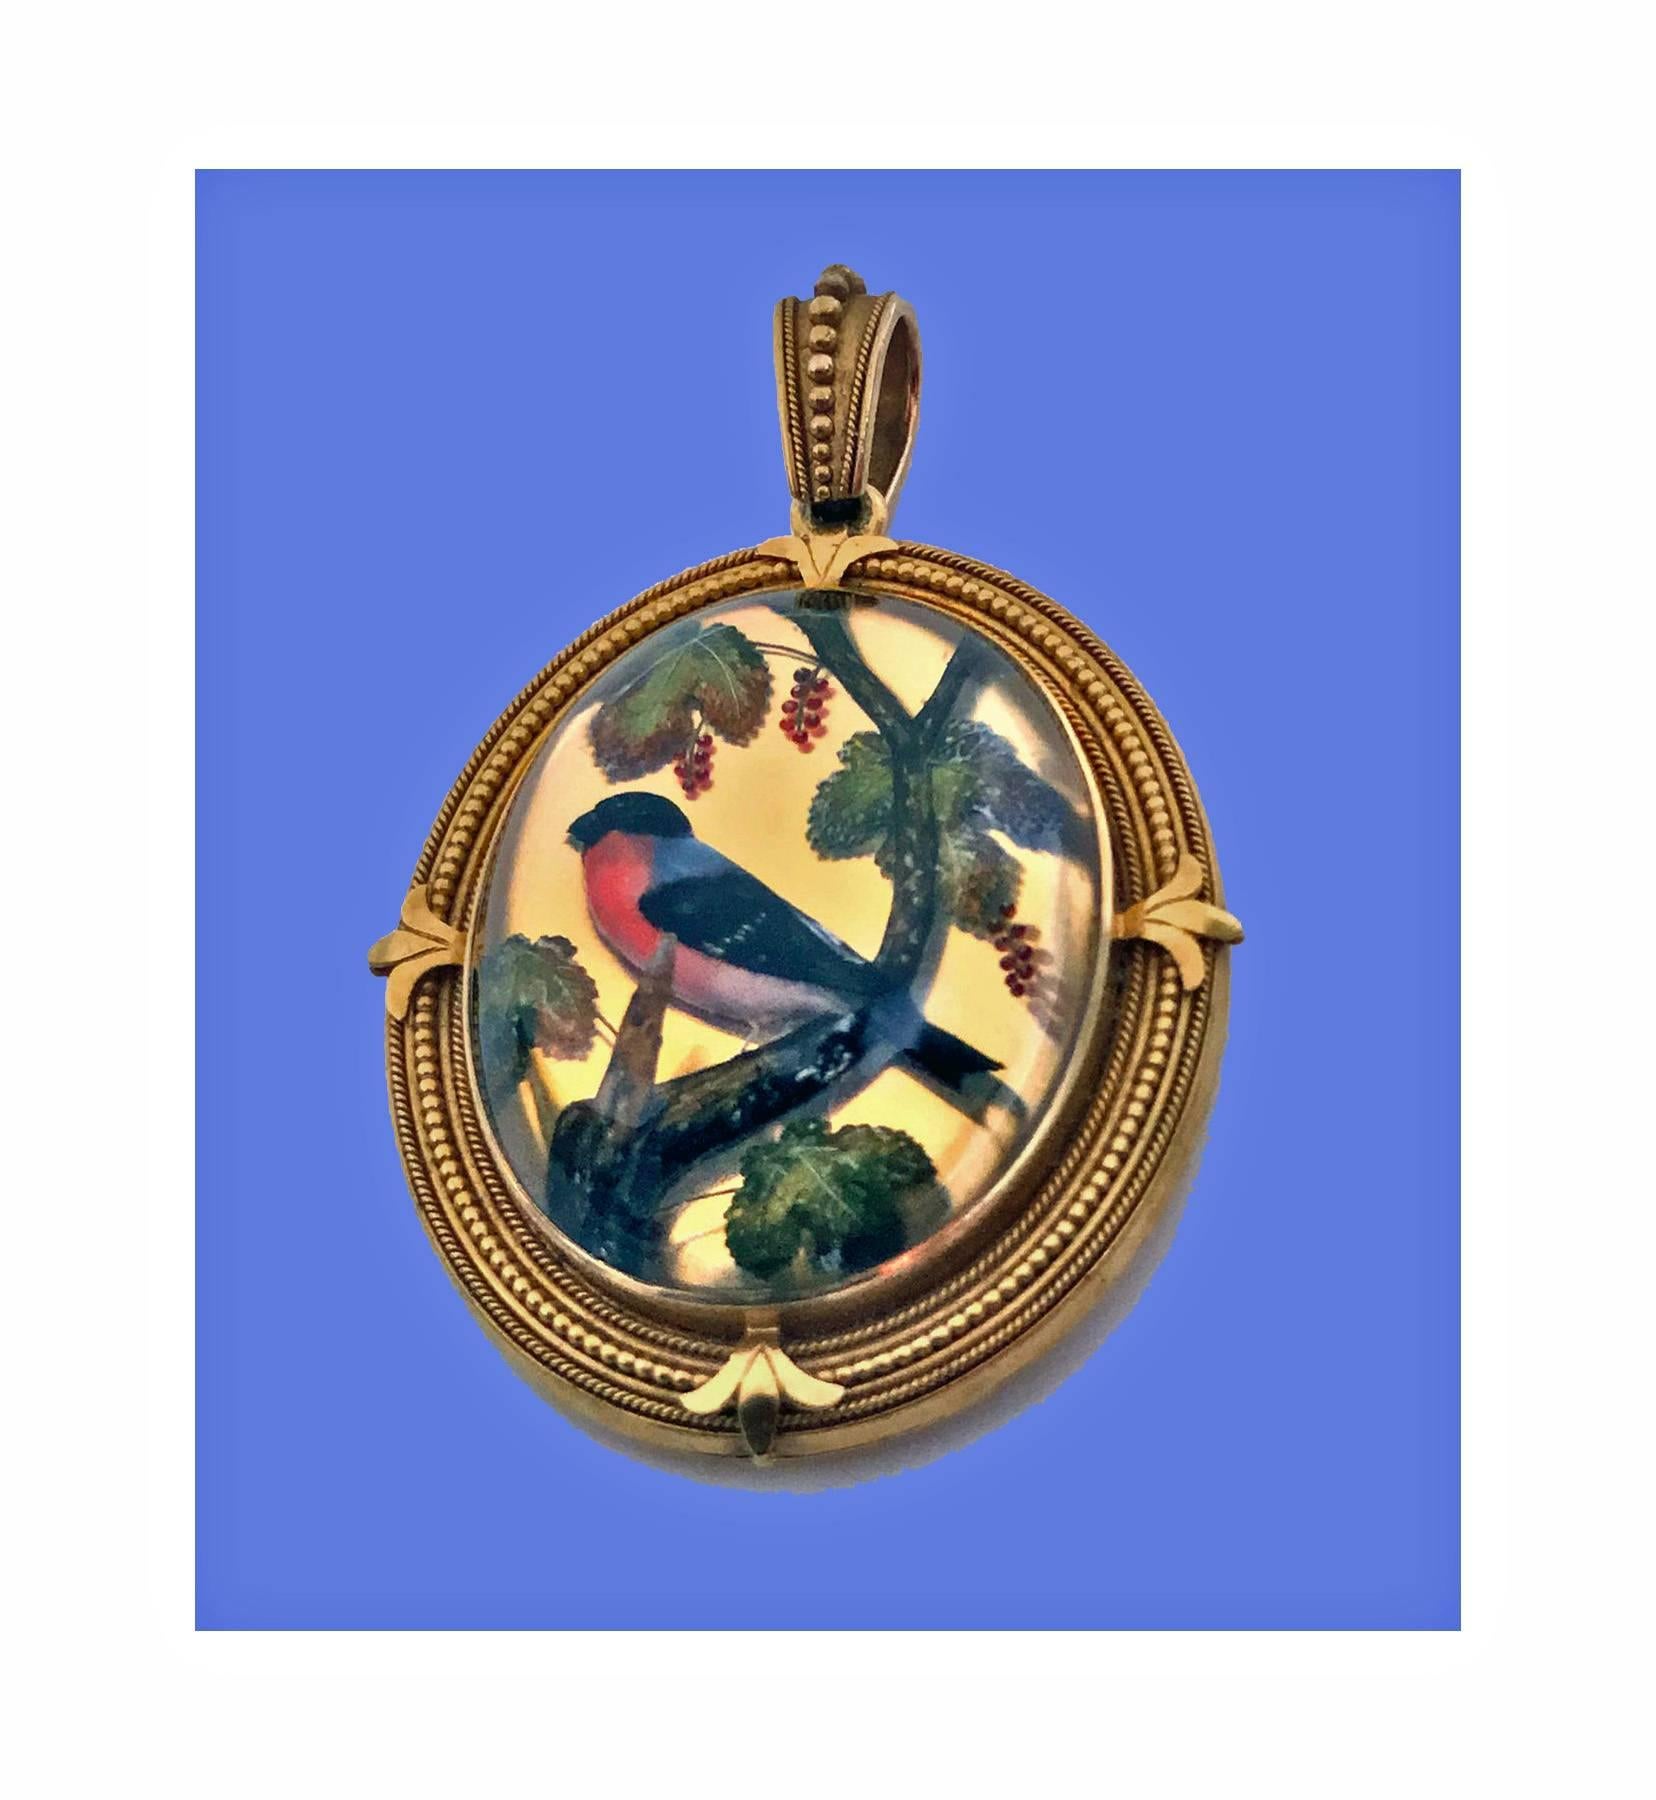 Very Fine 19th century Gold Reverse Intaglio painted Crystal `Essex Crystal’ large Pendant, English, C.1880. The deep oval cabochon rock crystal, carved and hand painted depicting a bullfinch perched on branch with leaf foliage and berries surround.